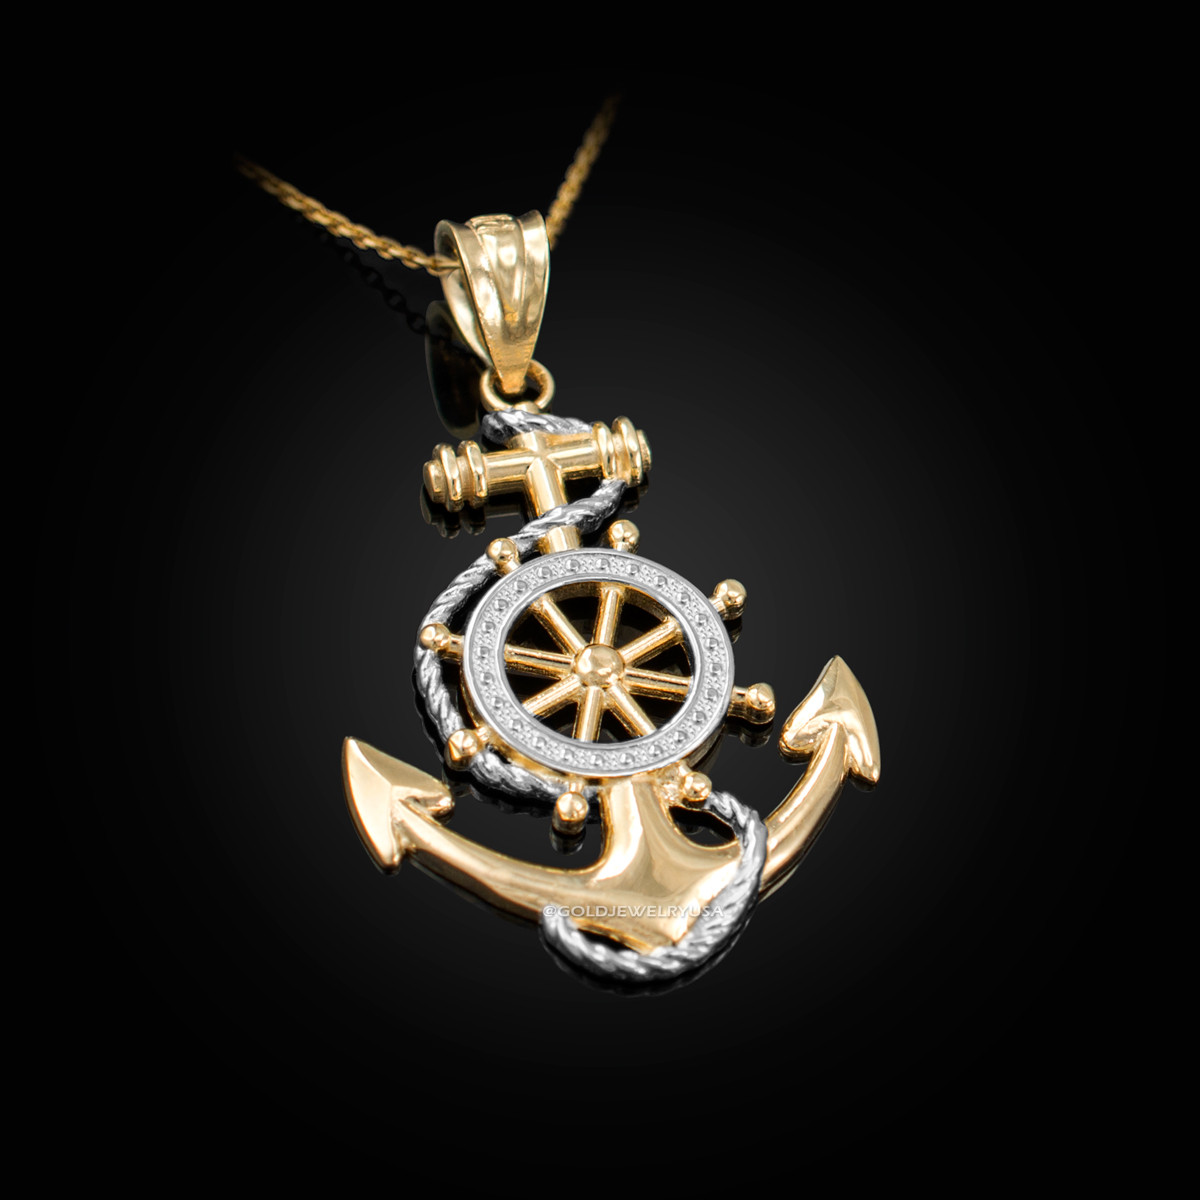 Women Gold Metal Chain Blue Anchor Charm Nautical Fashion Jewelry Necklace  